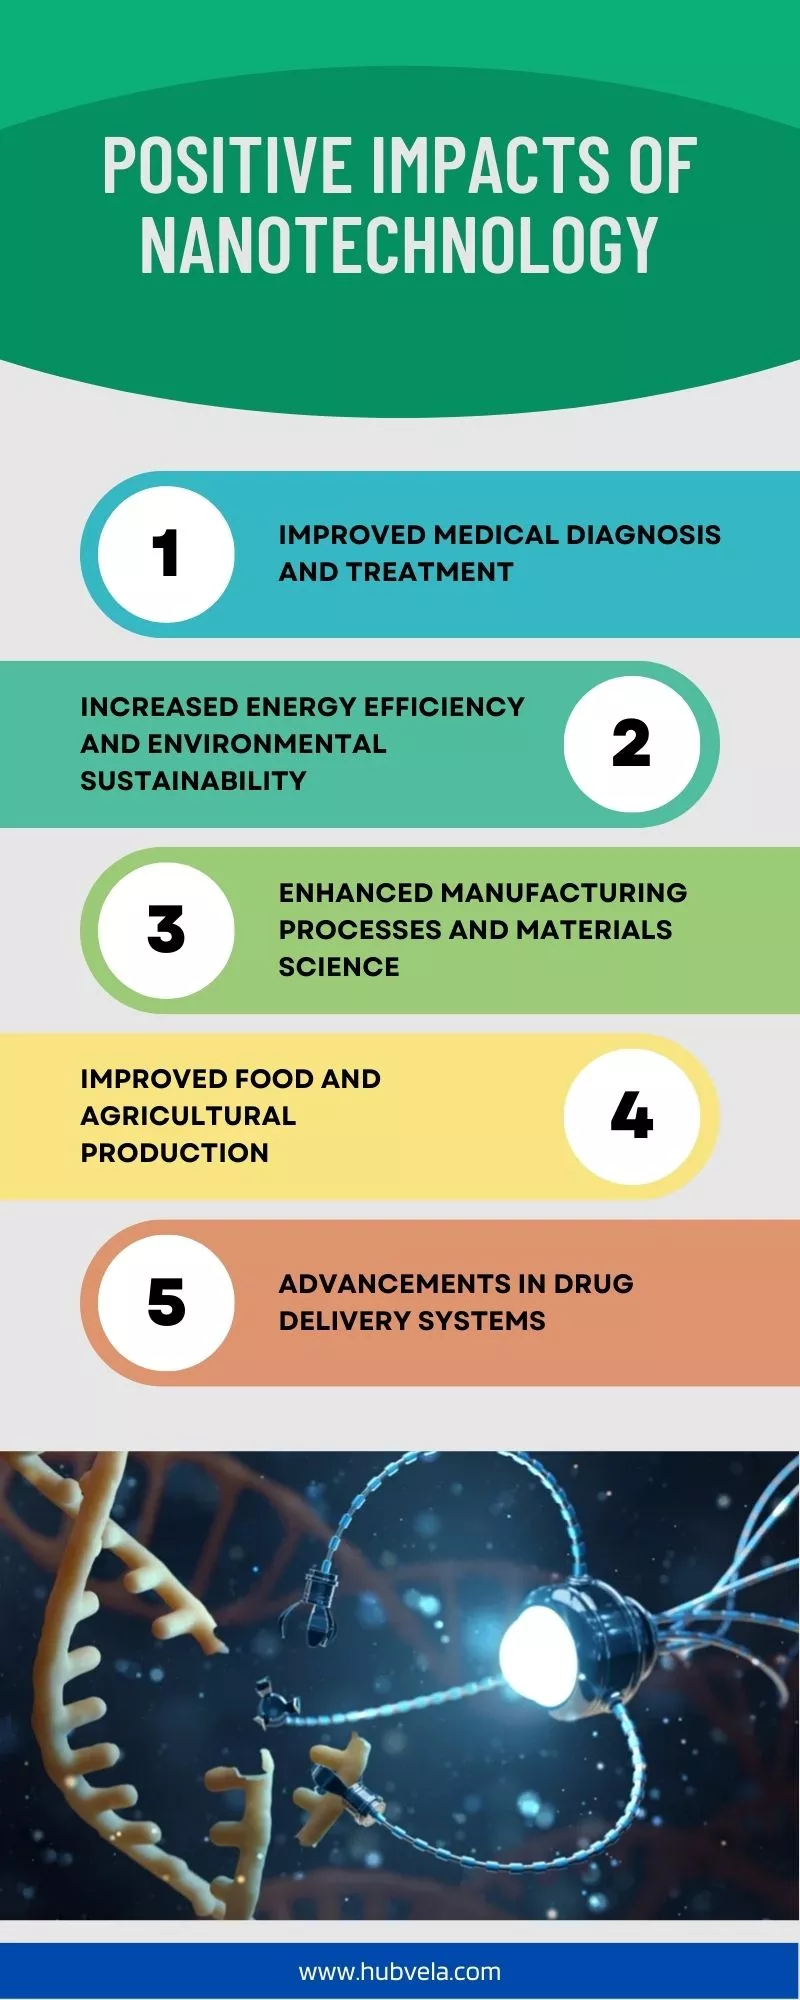 Positive Impacts of Nanotechnology infographic